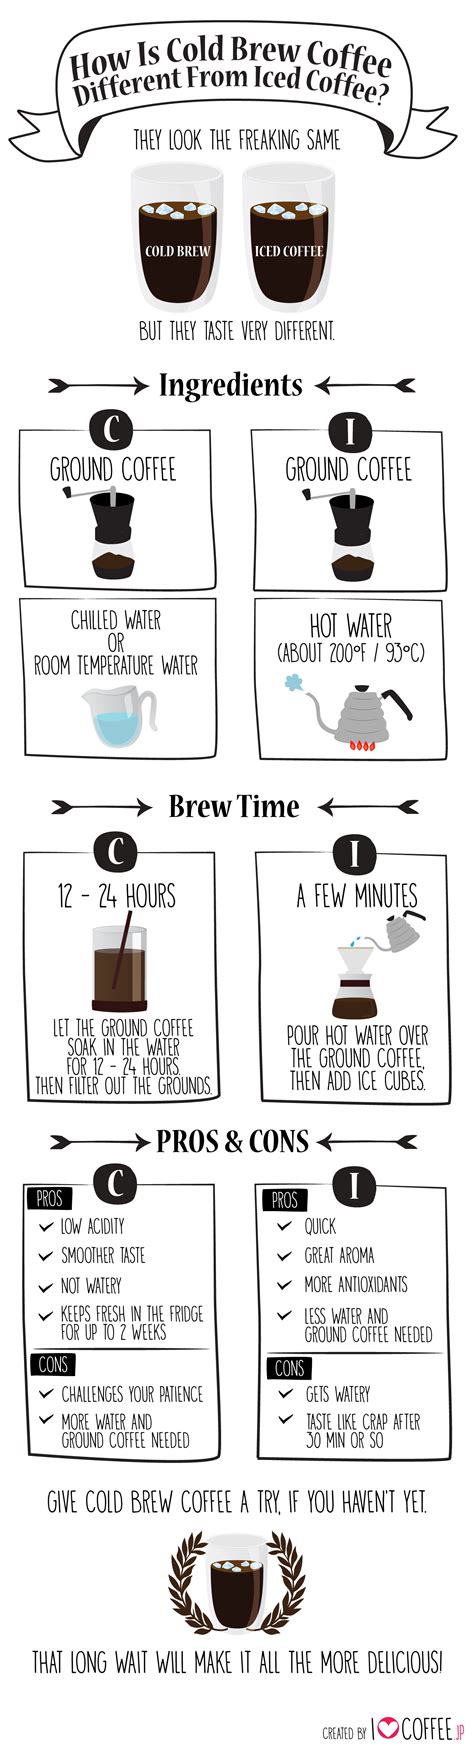 Cold Brew Vs Iced Coffee Infographic 10 Minutes Past Coffee